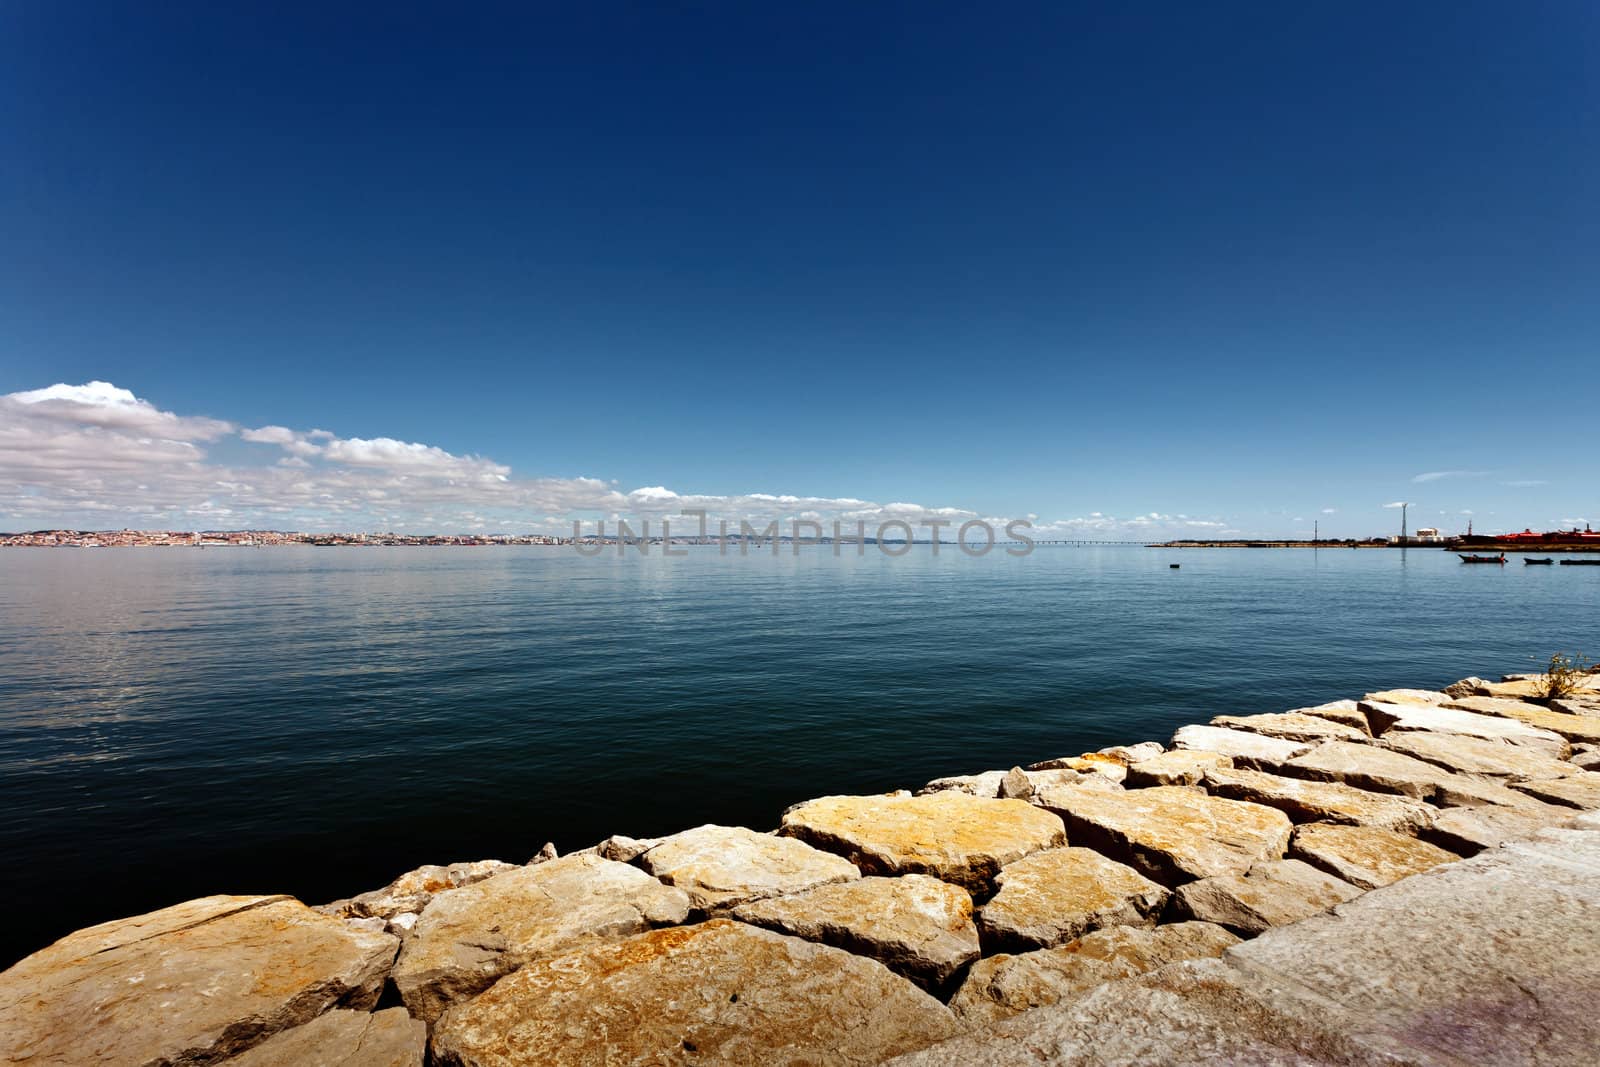 Tejo river with the city of Lisbon in the background.